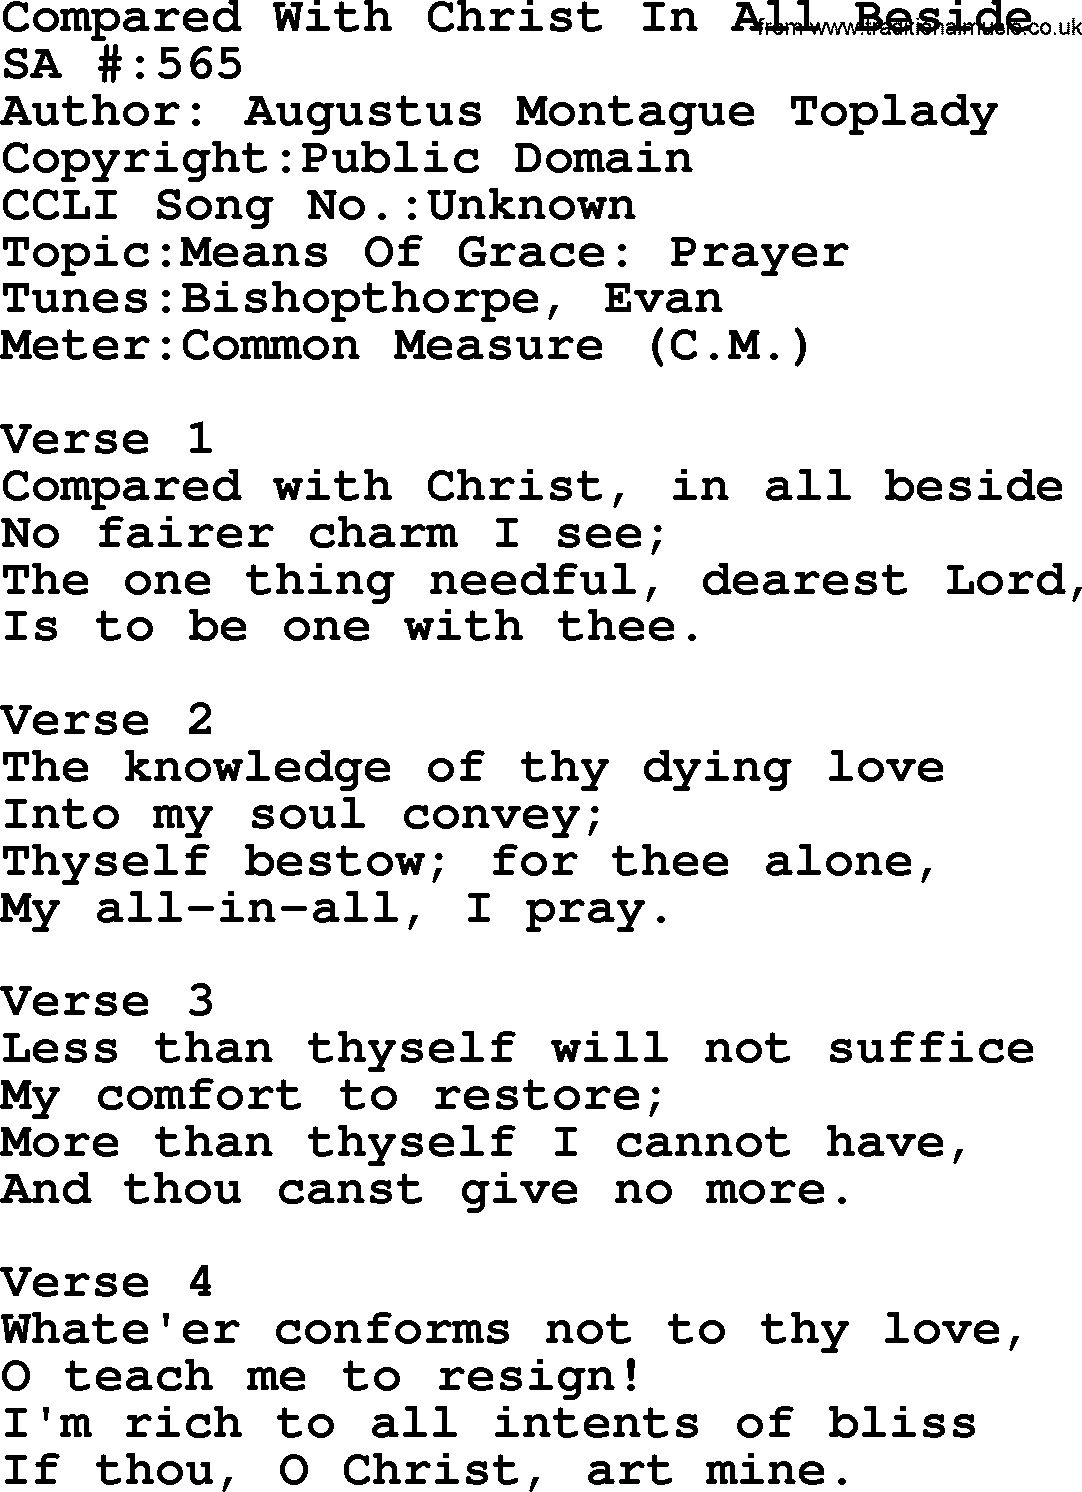 Salvation Army Hymnal, title: Compared With Christ In All Beside, with lyrics and PDF,